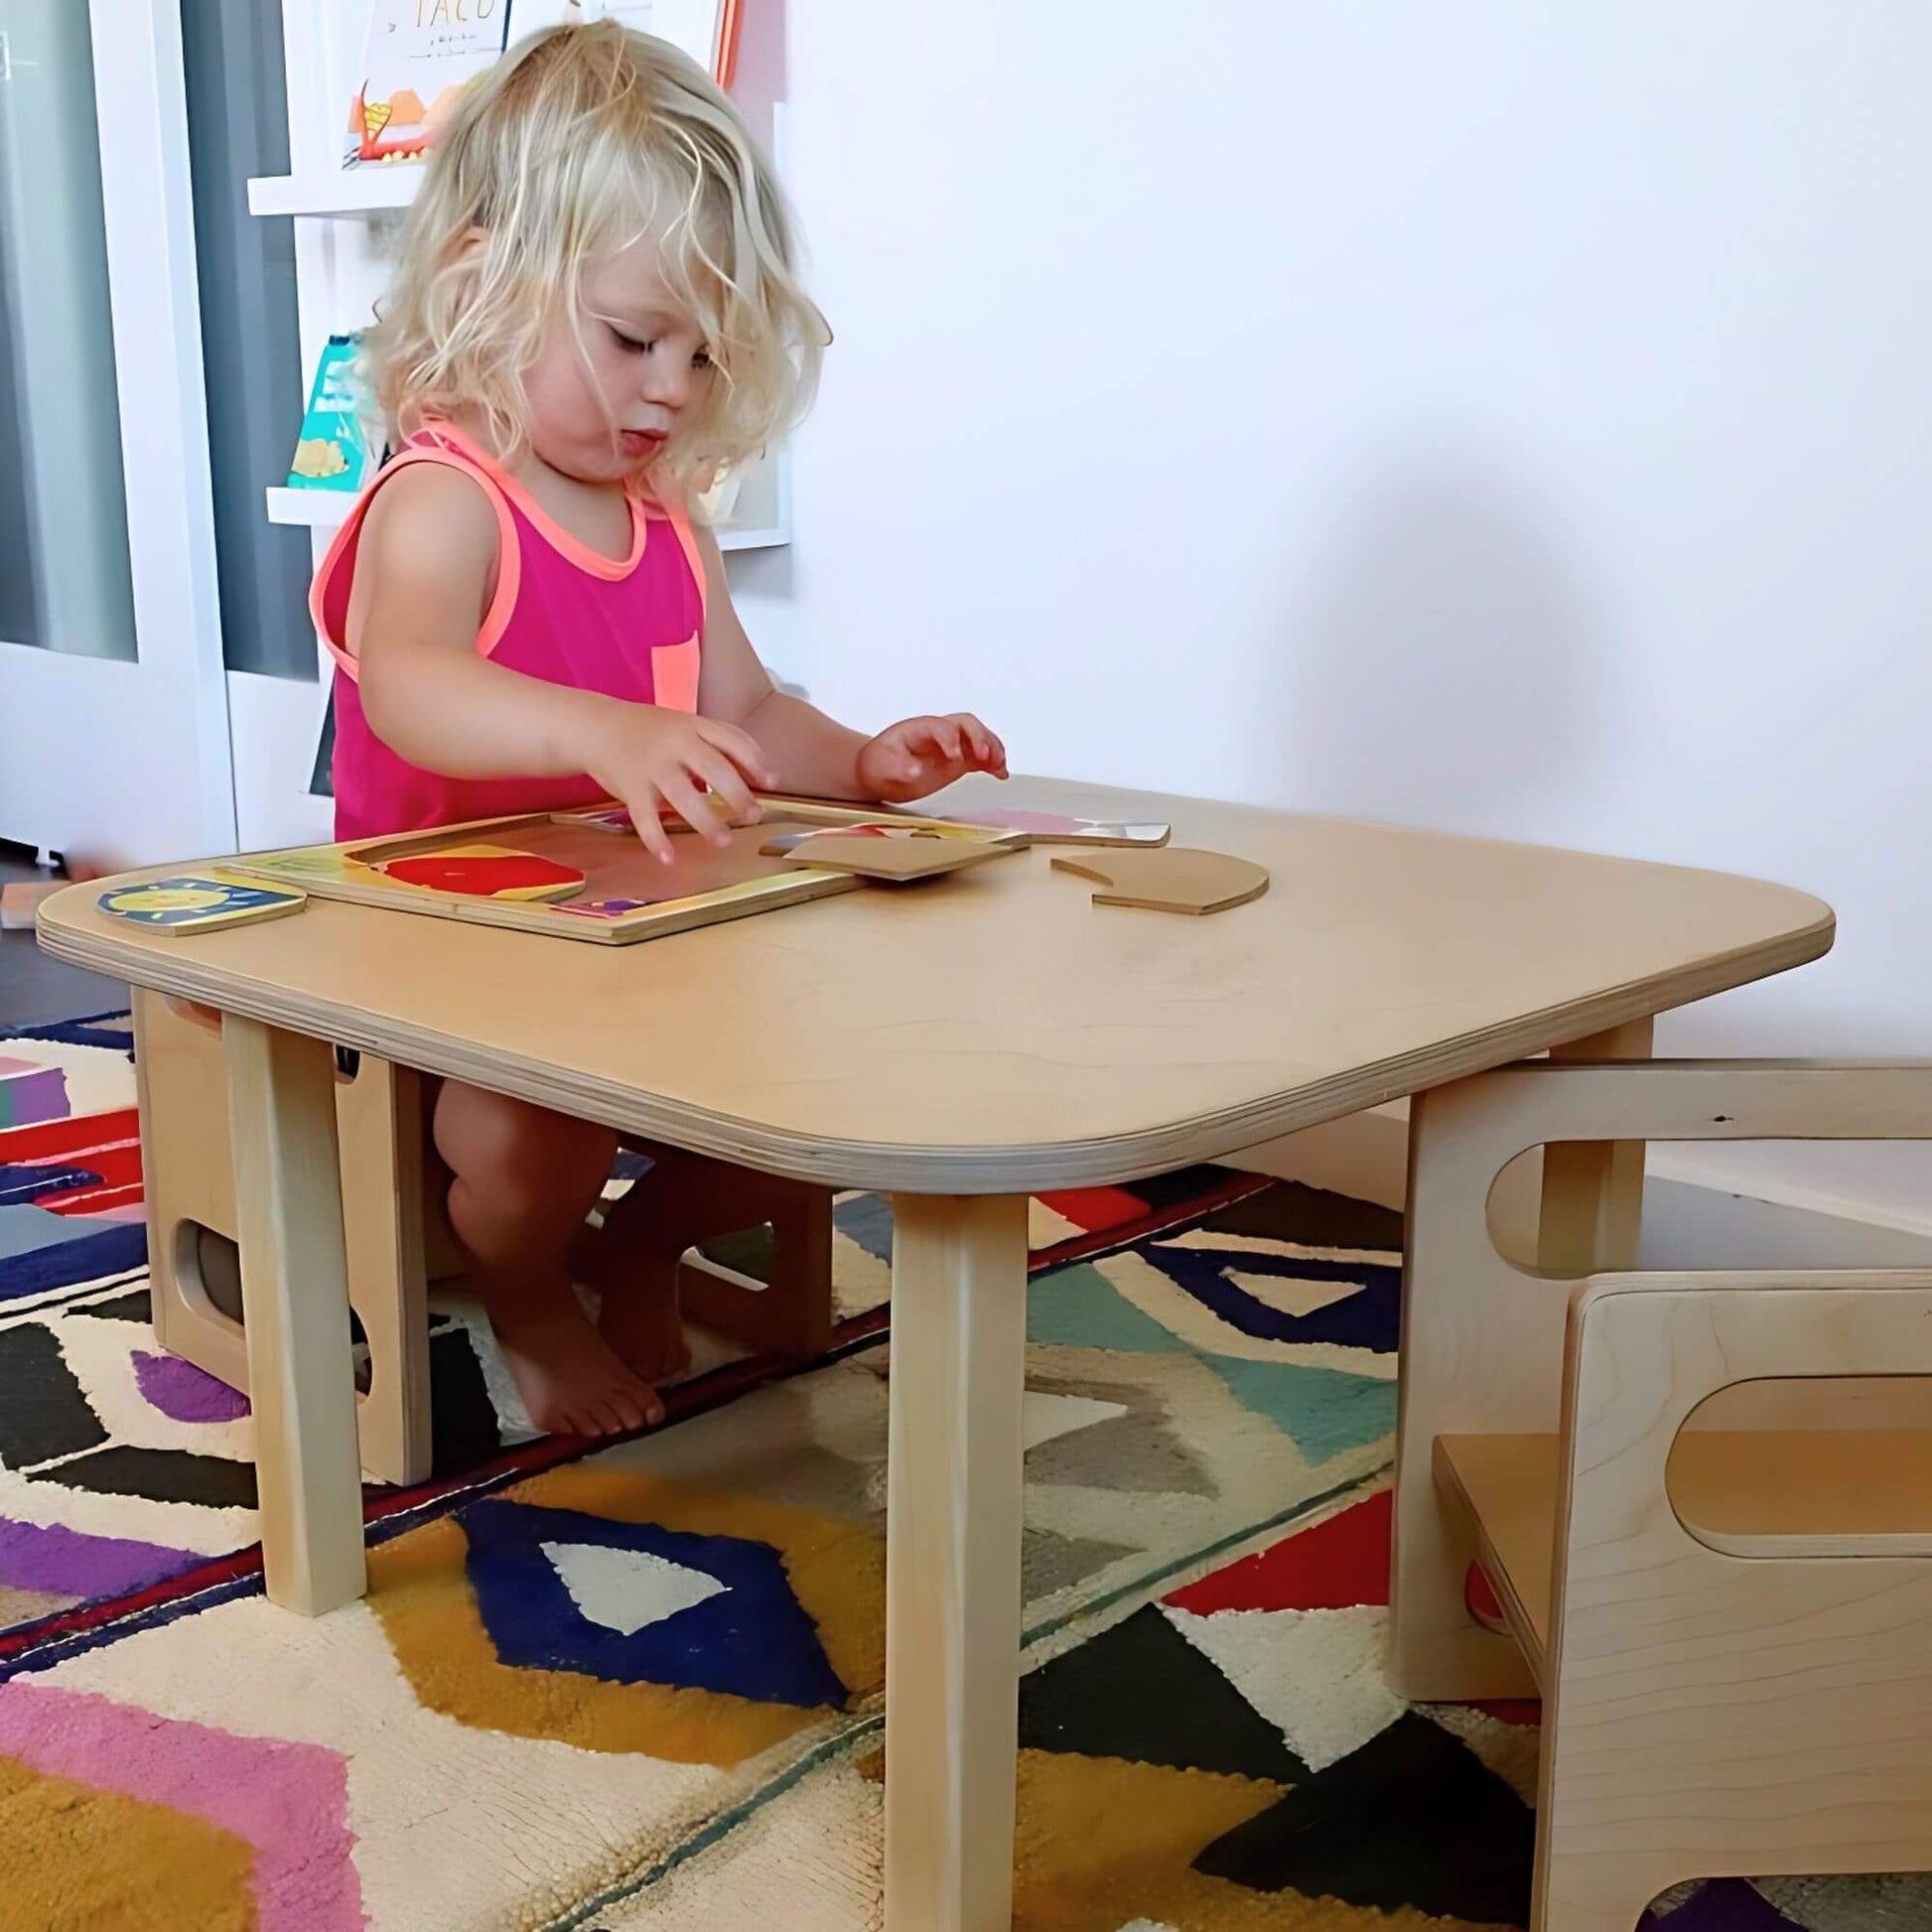 Toddler sitting at montessori toddler table made out of wood.